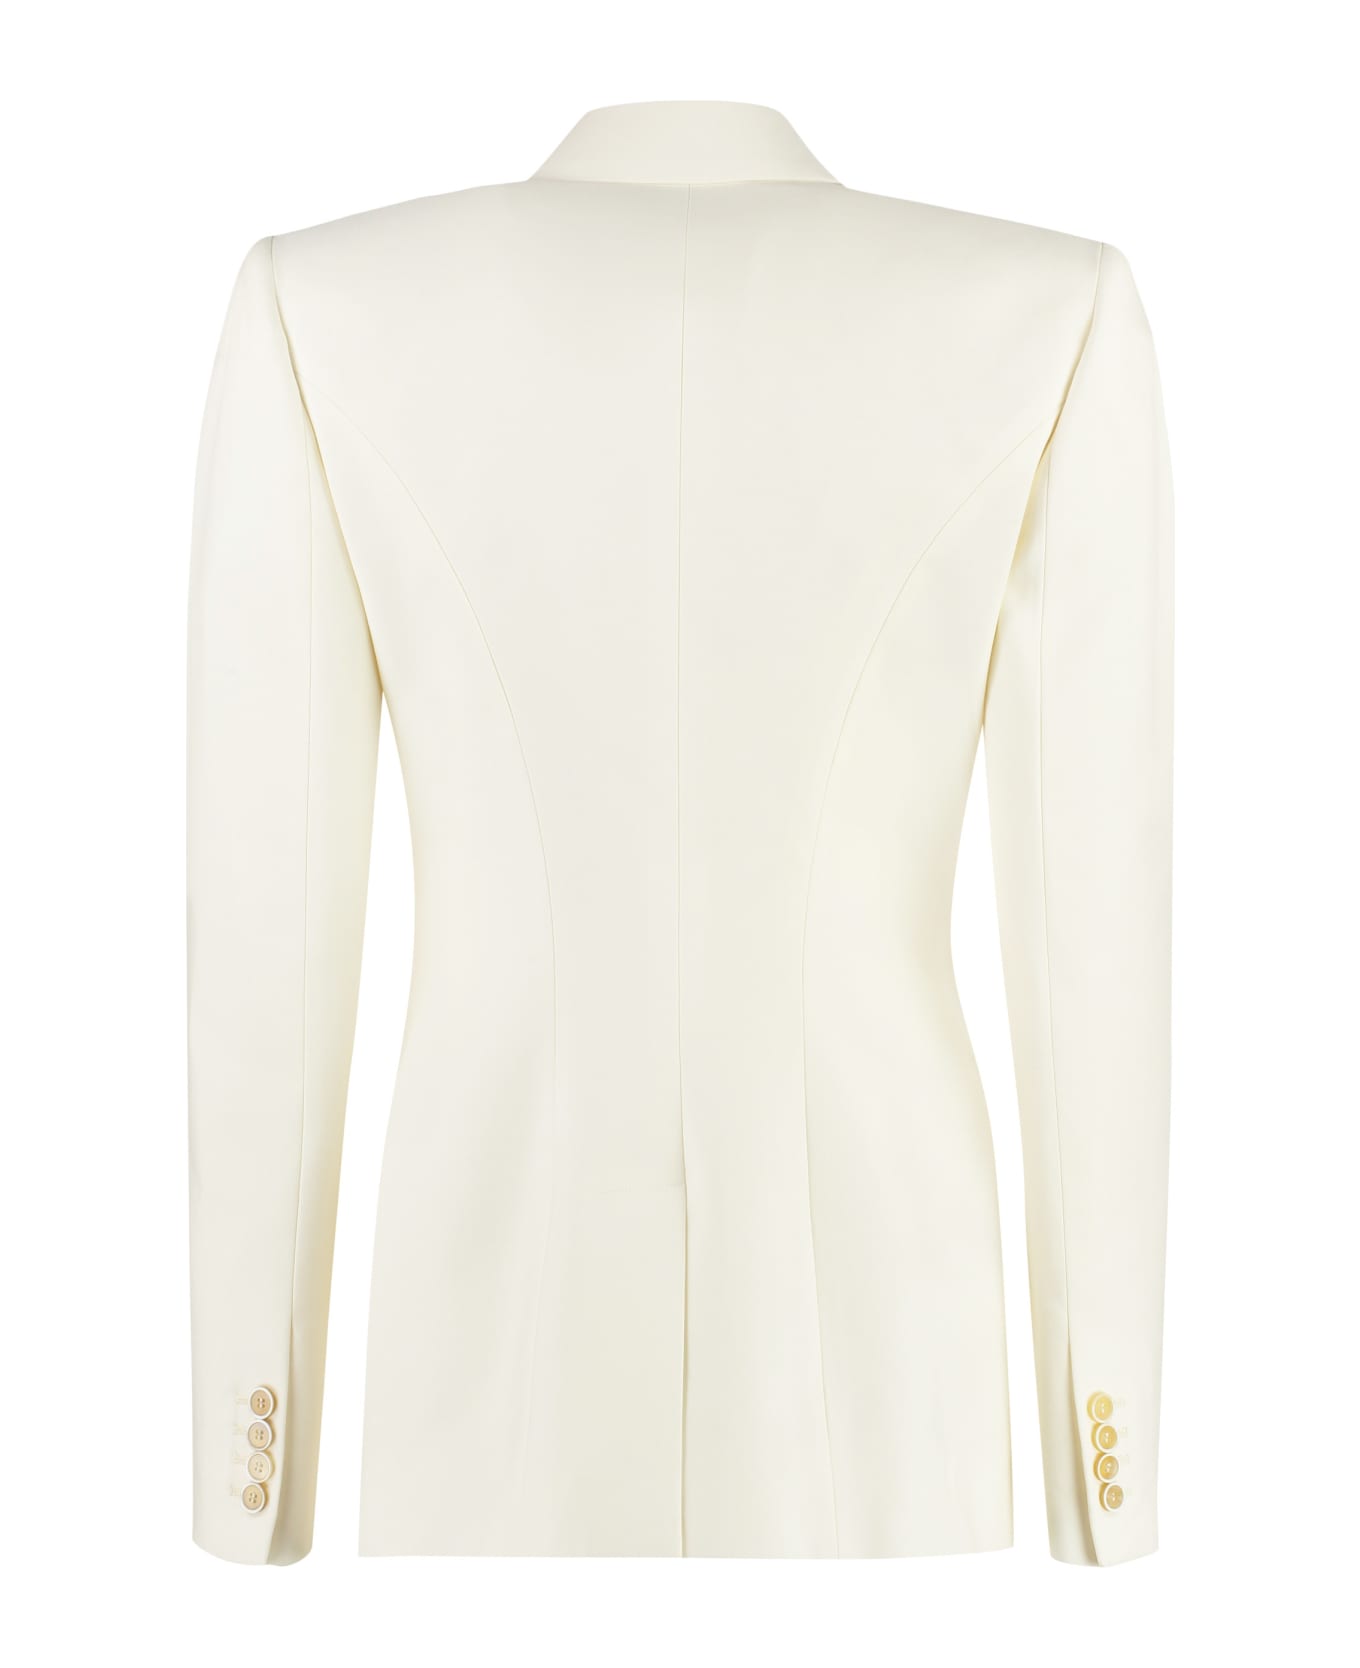 Alexander McQueen Double-breasted Wool Jacket - Ivory